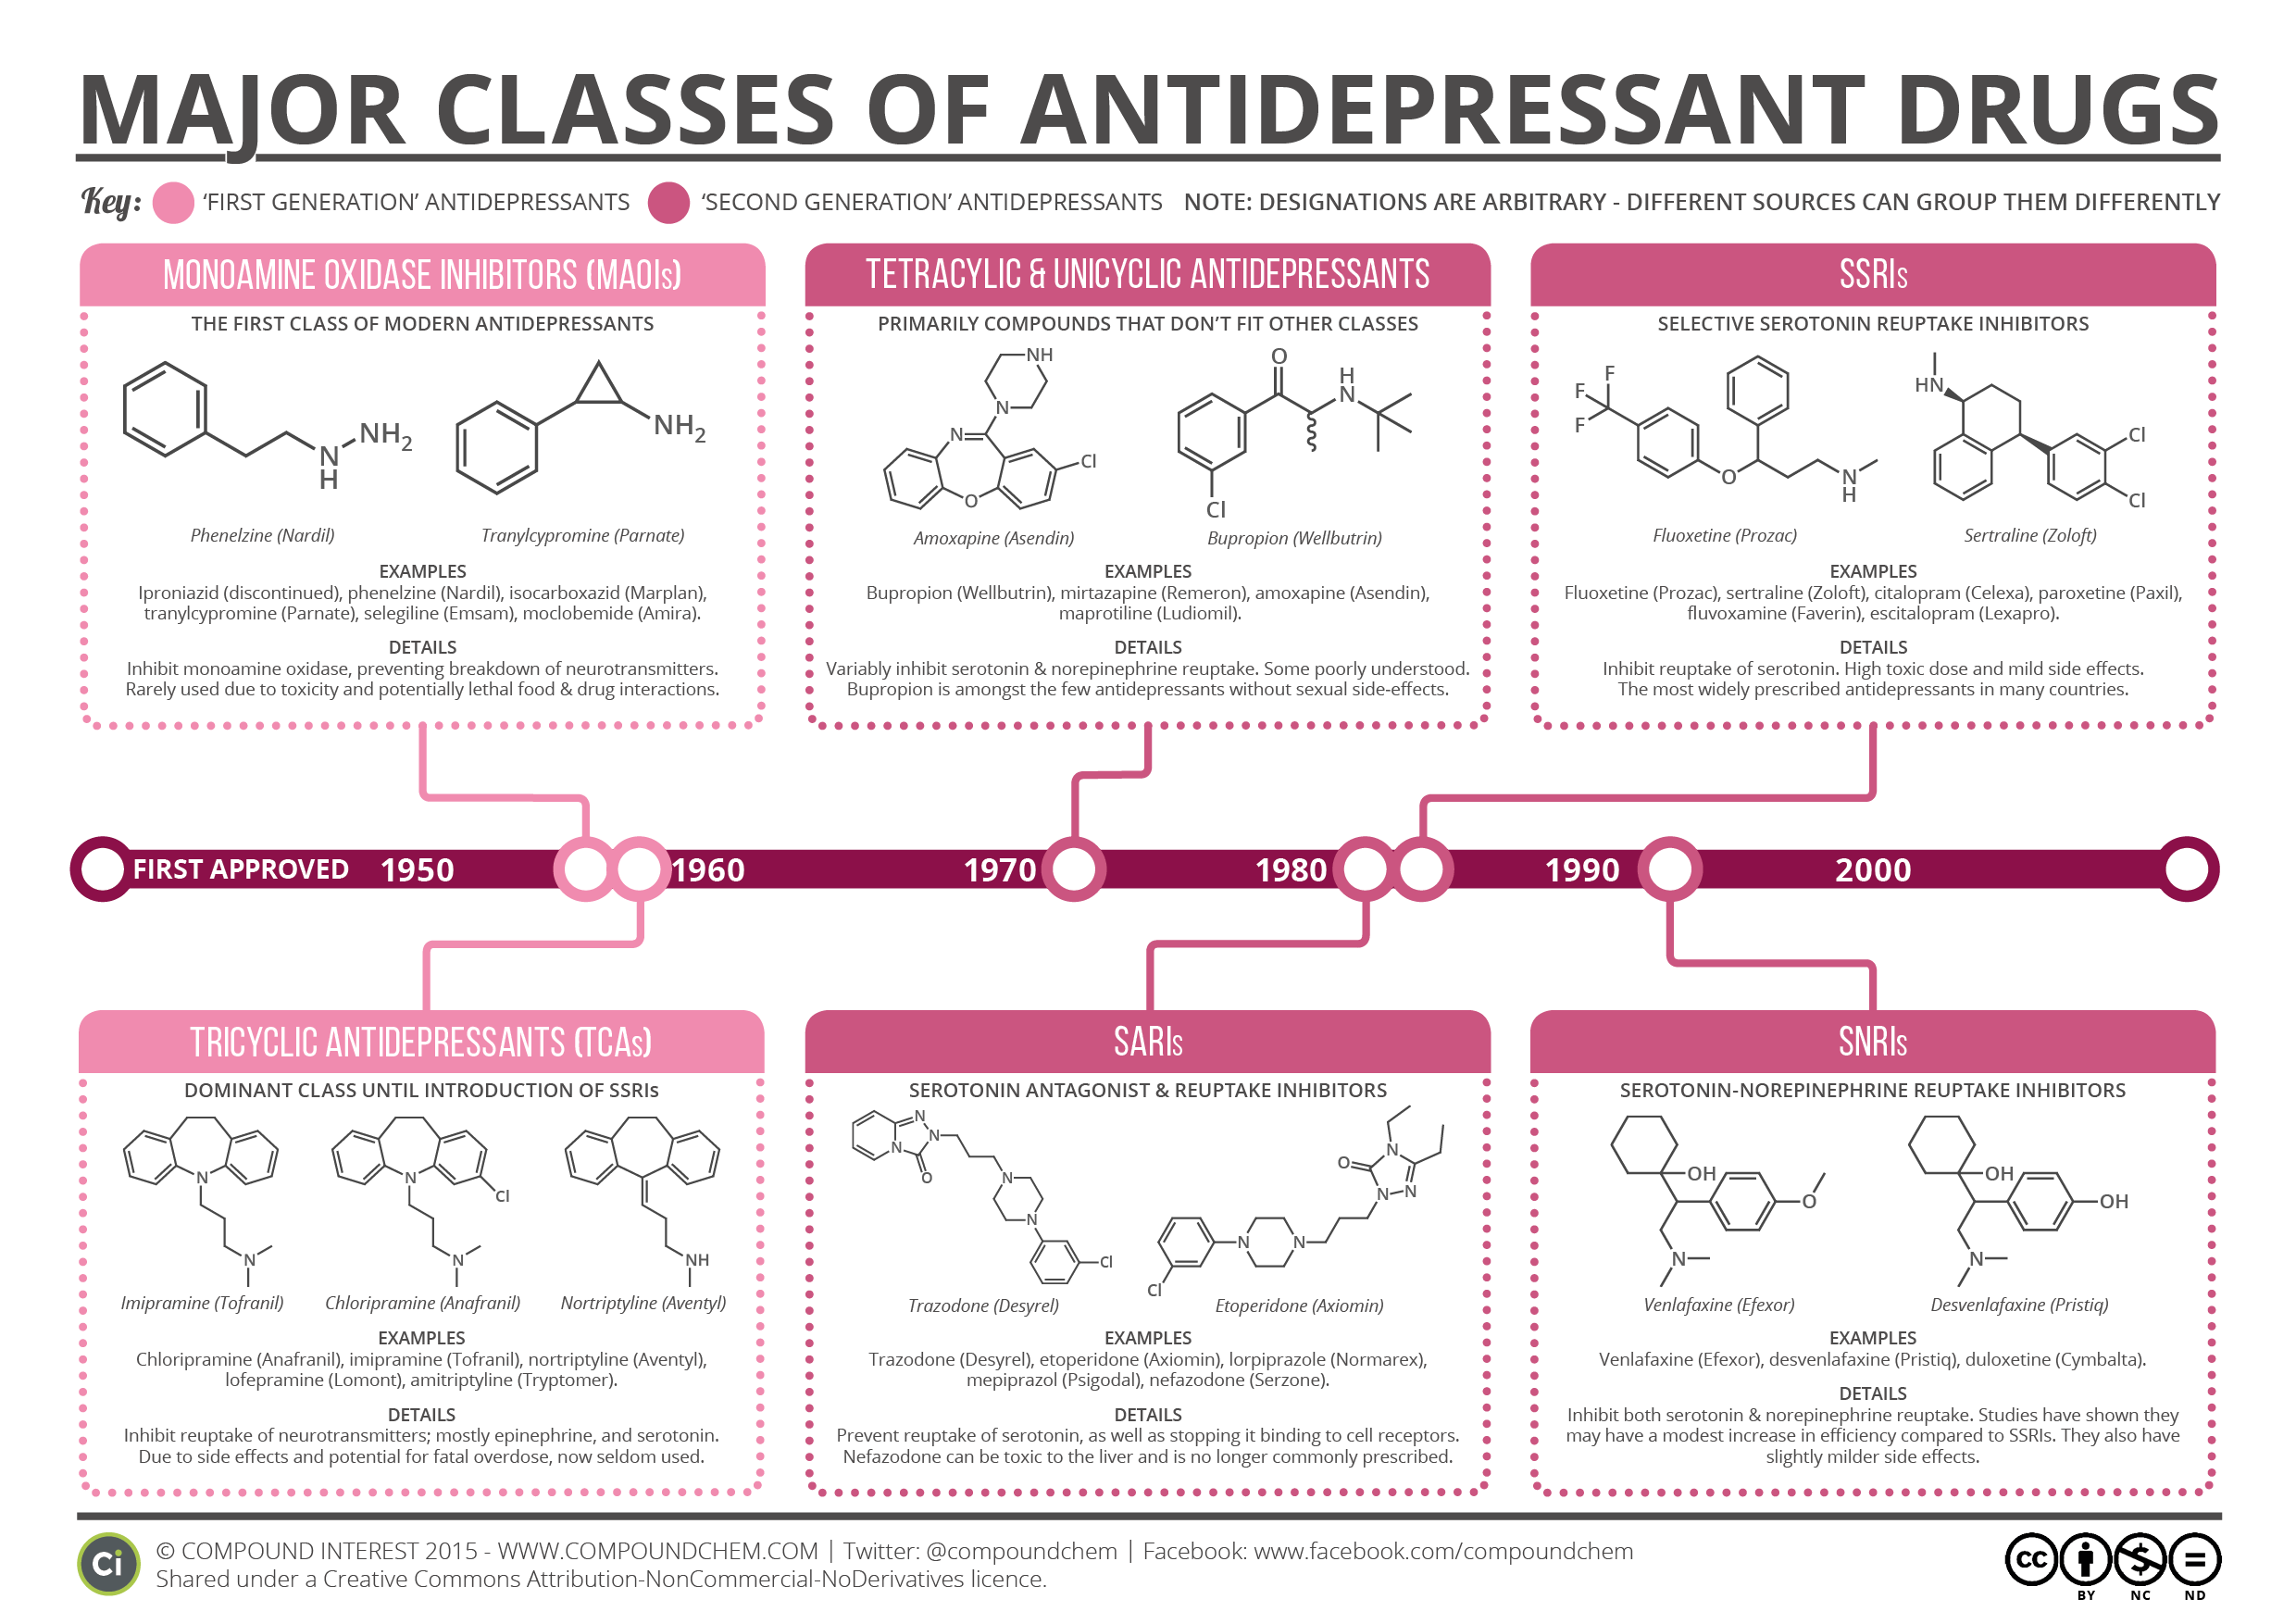 Classes-of-Antidepressants-Summary.png